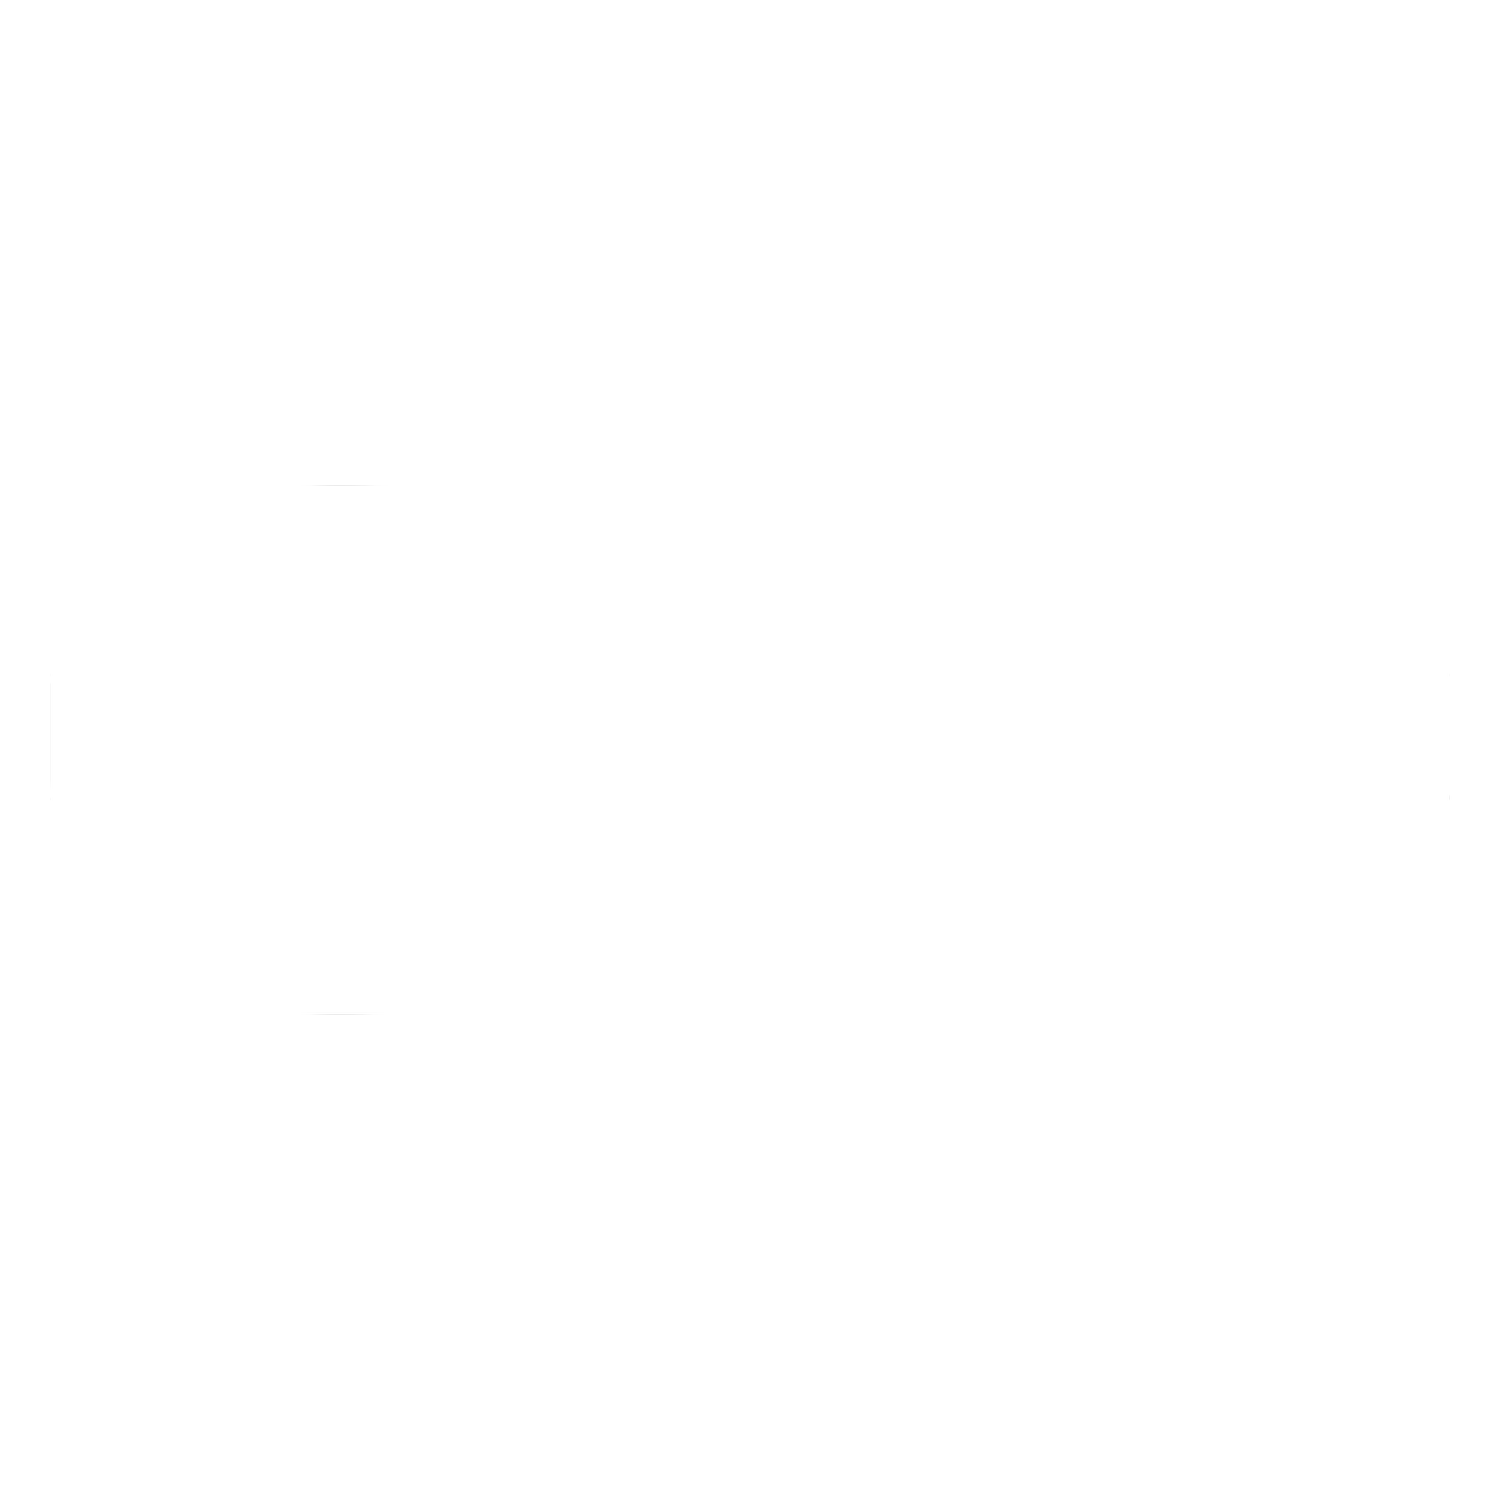 Chris Walsh Productions